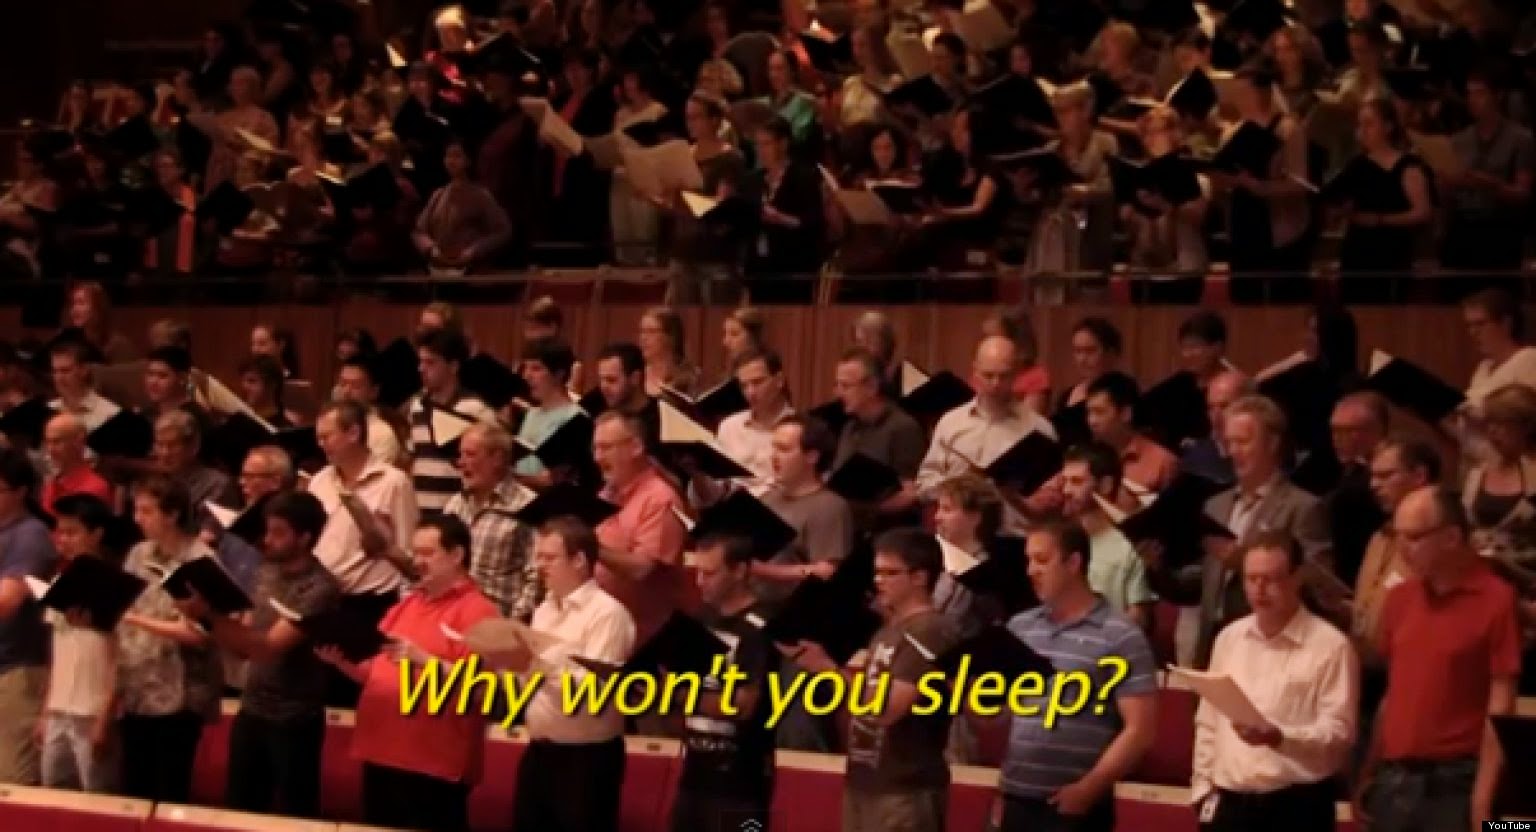 English is FUNtastic: A funny ode to sleep-deprived parents: 